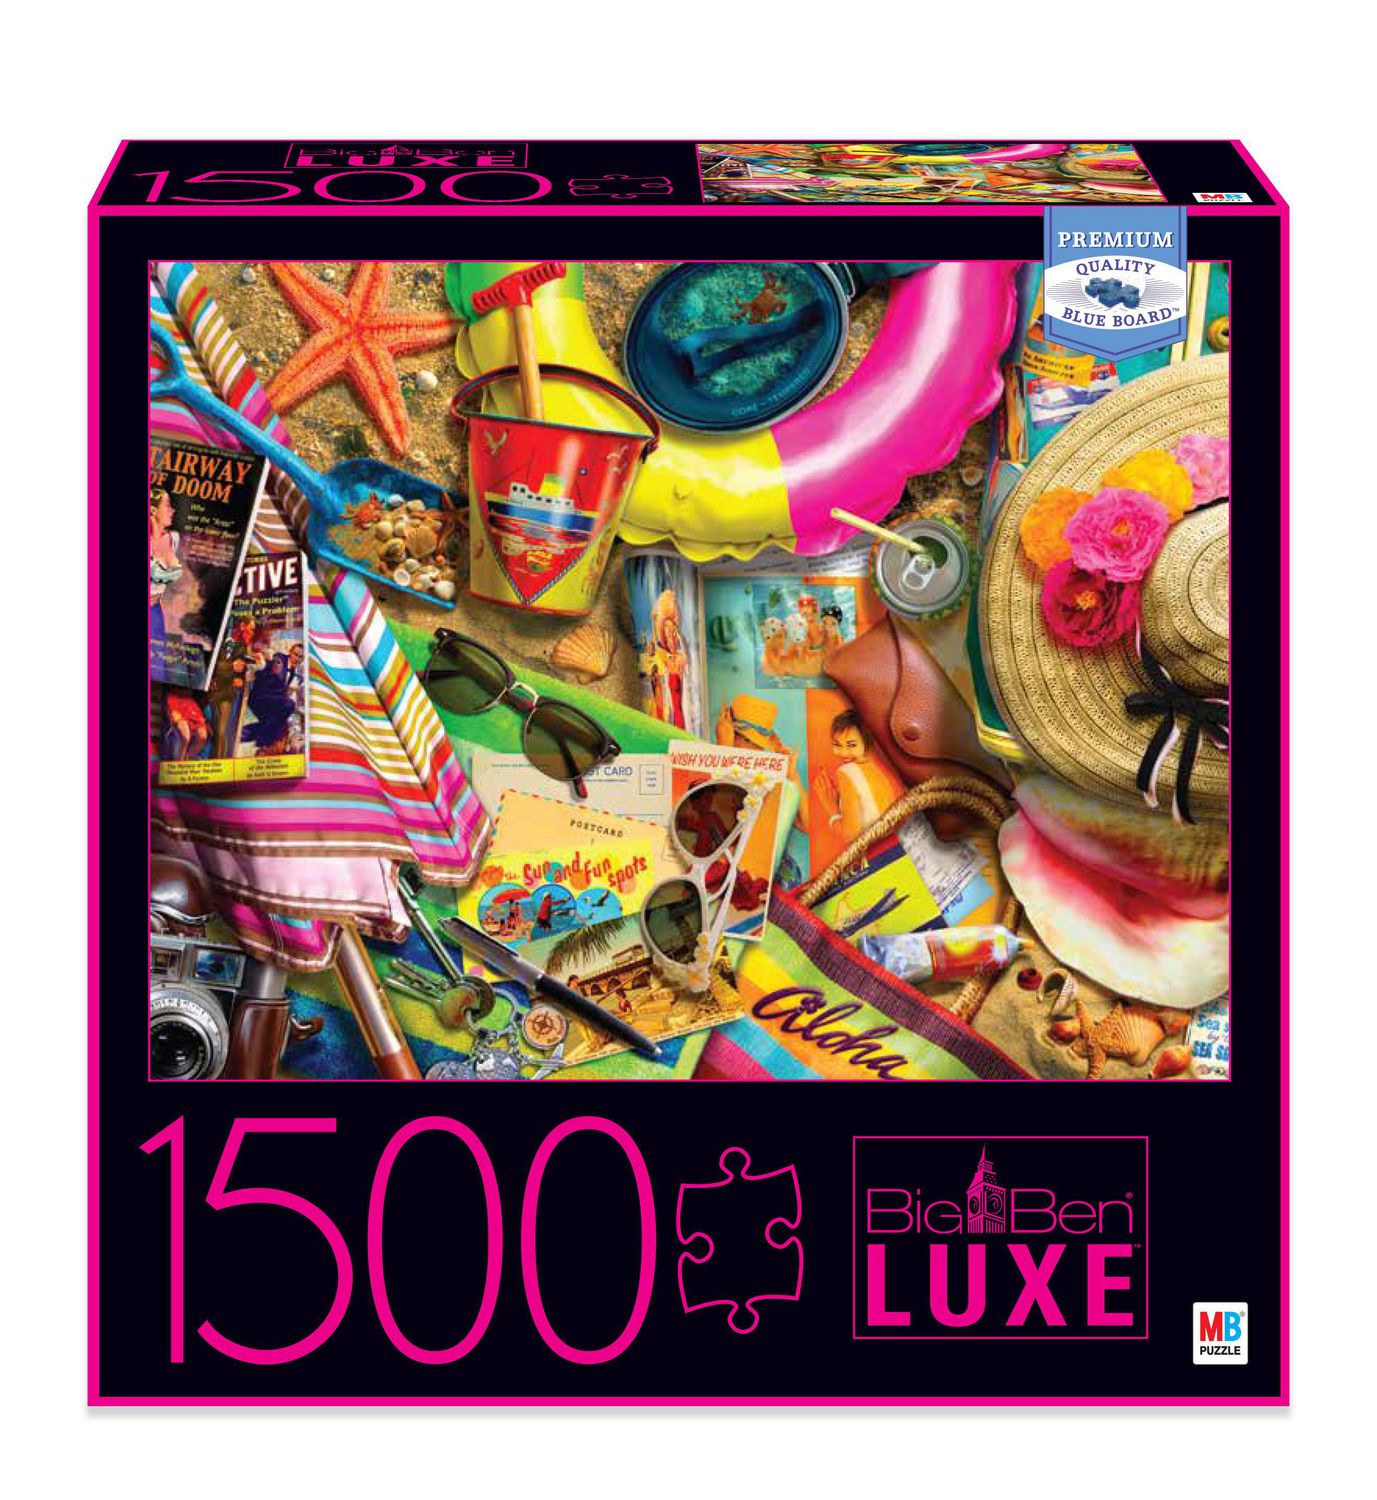 Big Ben Luxe Antique Advertising Brands 1000 PC Jigsaw Puzzle Collage 27x20 for sale online 